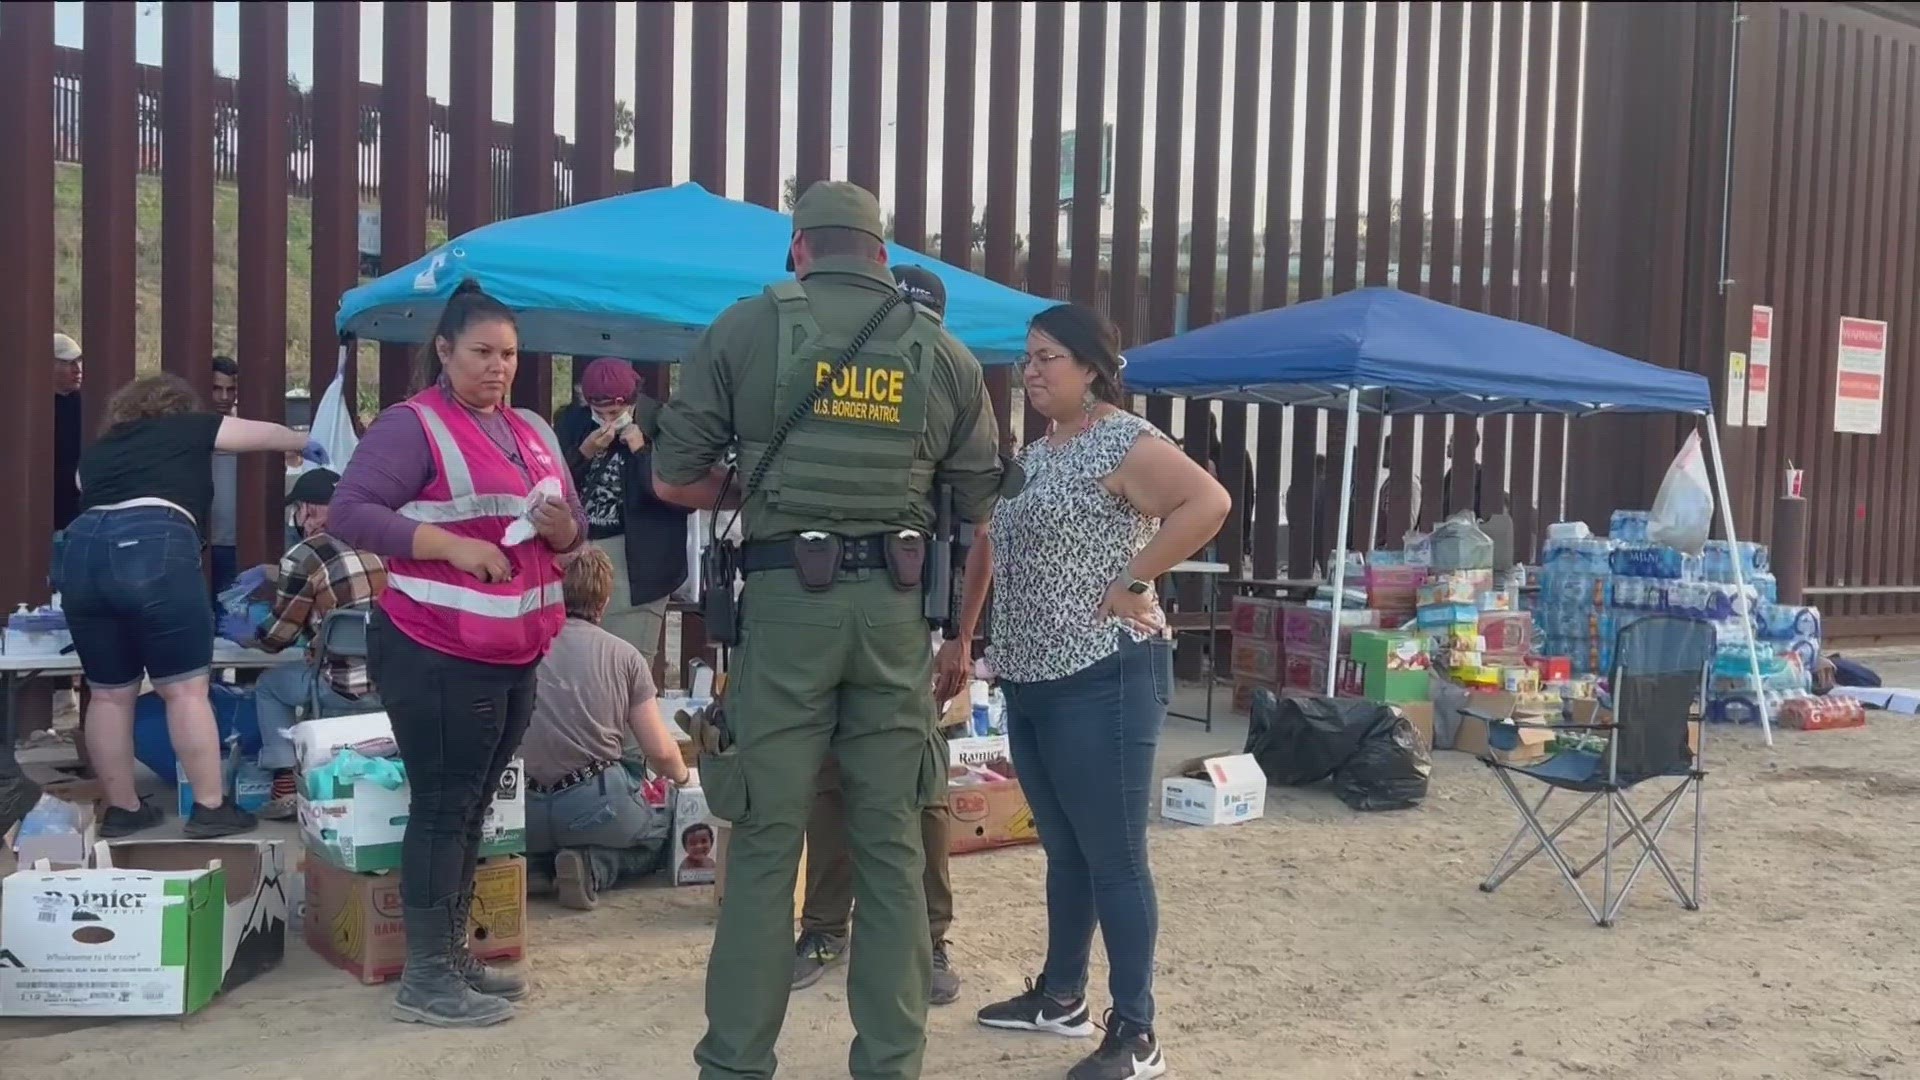 Border Patrol agents loaded some people onto a bus to get them processed Tuesday night. Others were given wristbands after checking their legal documents.